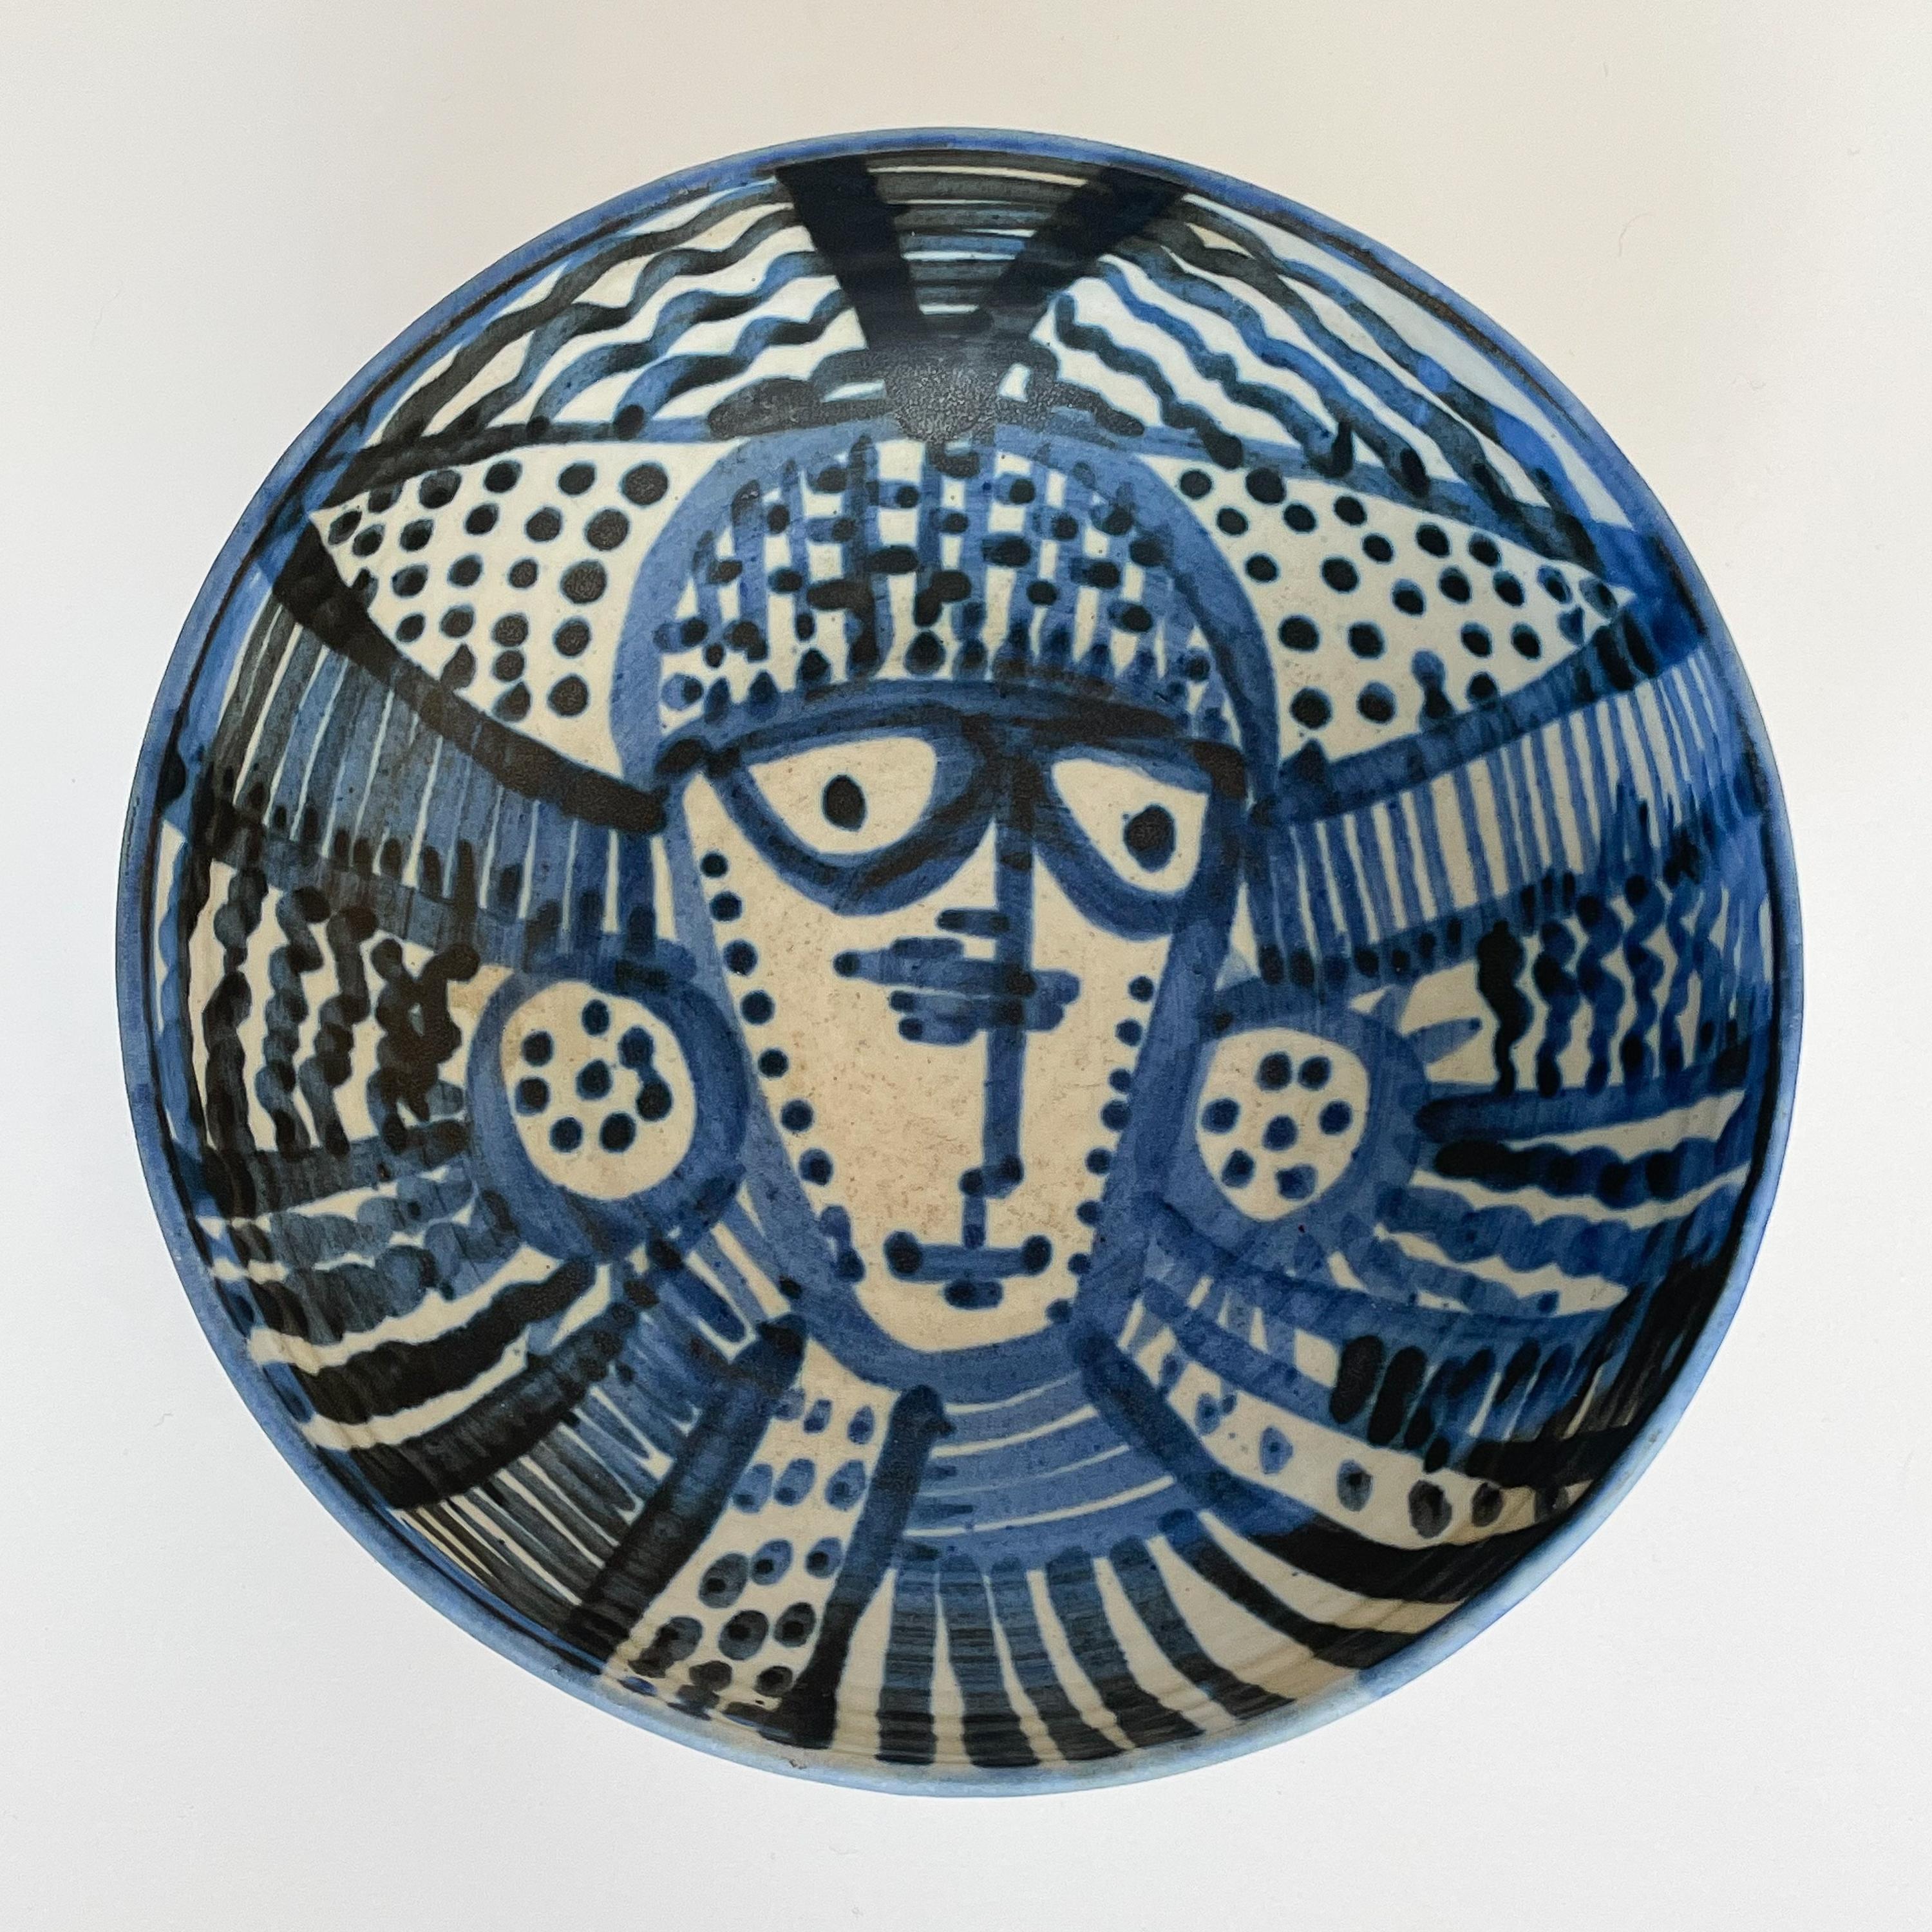 Blue glazed ceramic bowl with abstract face design by Ann Arbor ceramist Janka McClatchey, circa 1960s. Modernist studio pottery bowl with Picasso style abstract face in blue glaze on cream background. Signed 